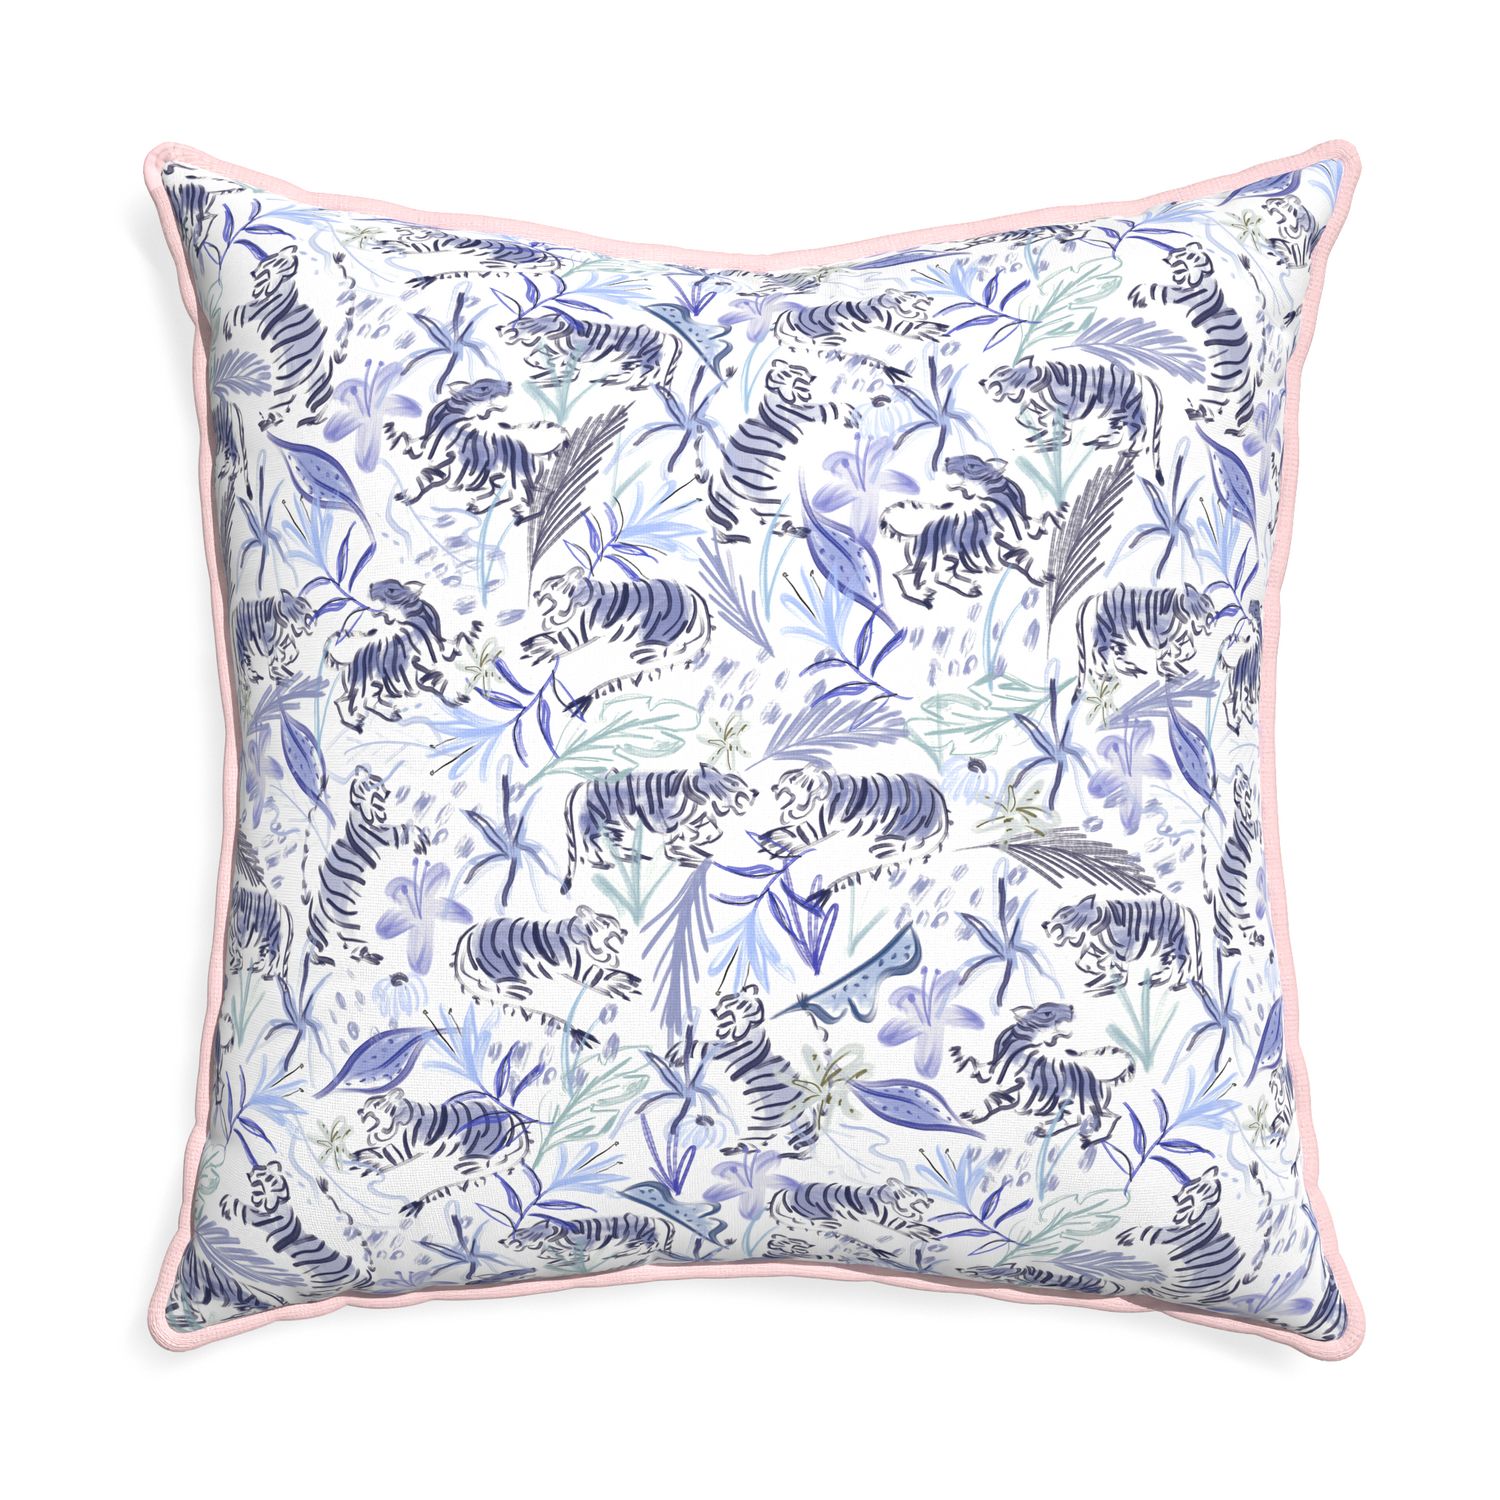 Euro-sham frida blue custom blue with intricate tiger designpillow with petal piping on white background